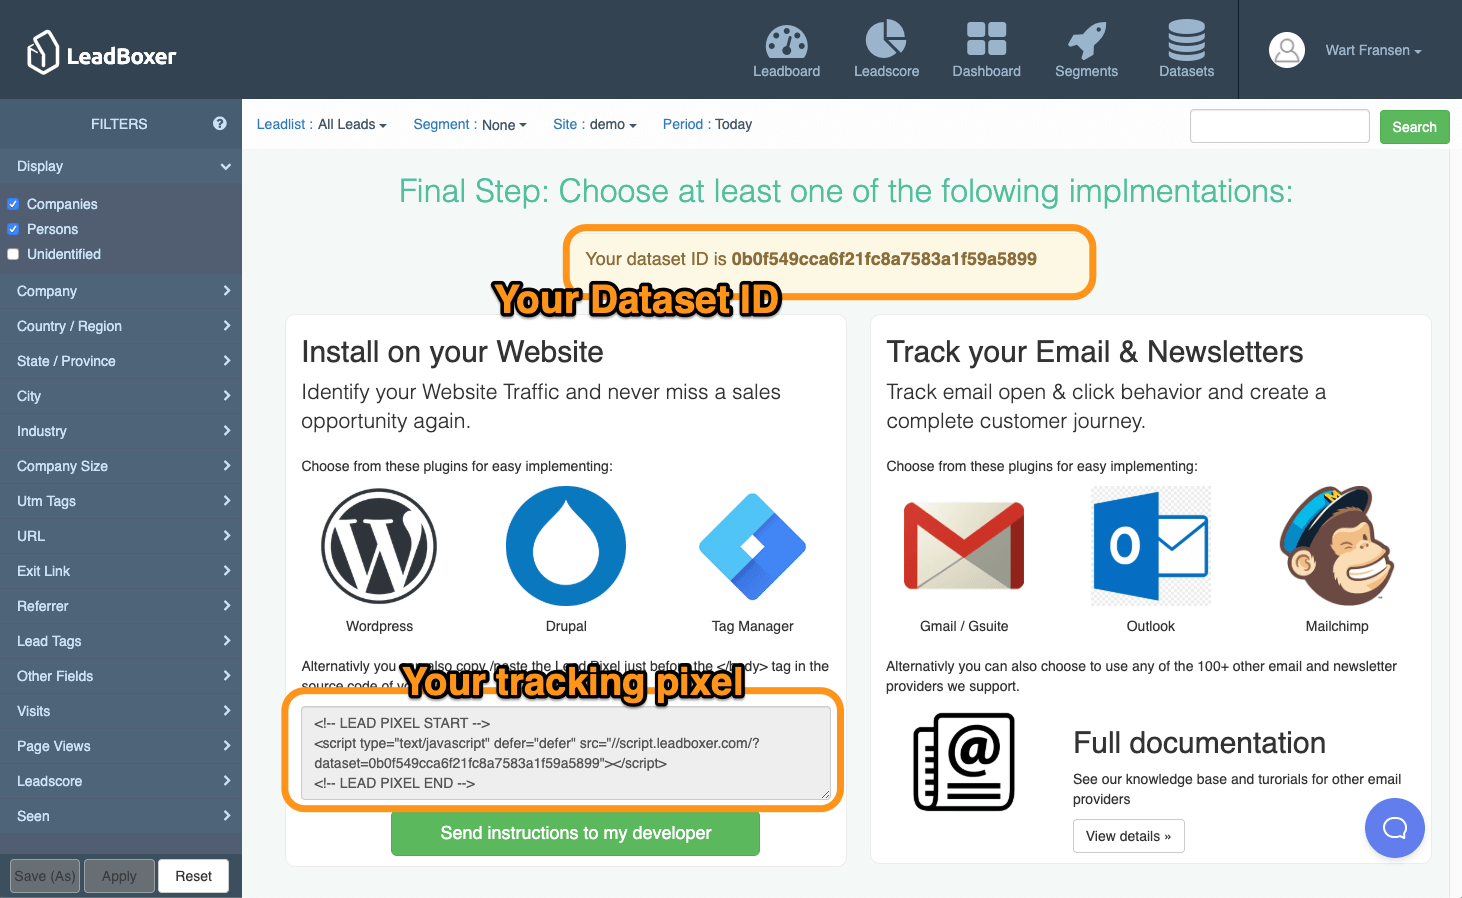 email tracking pixel to identify sales leads